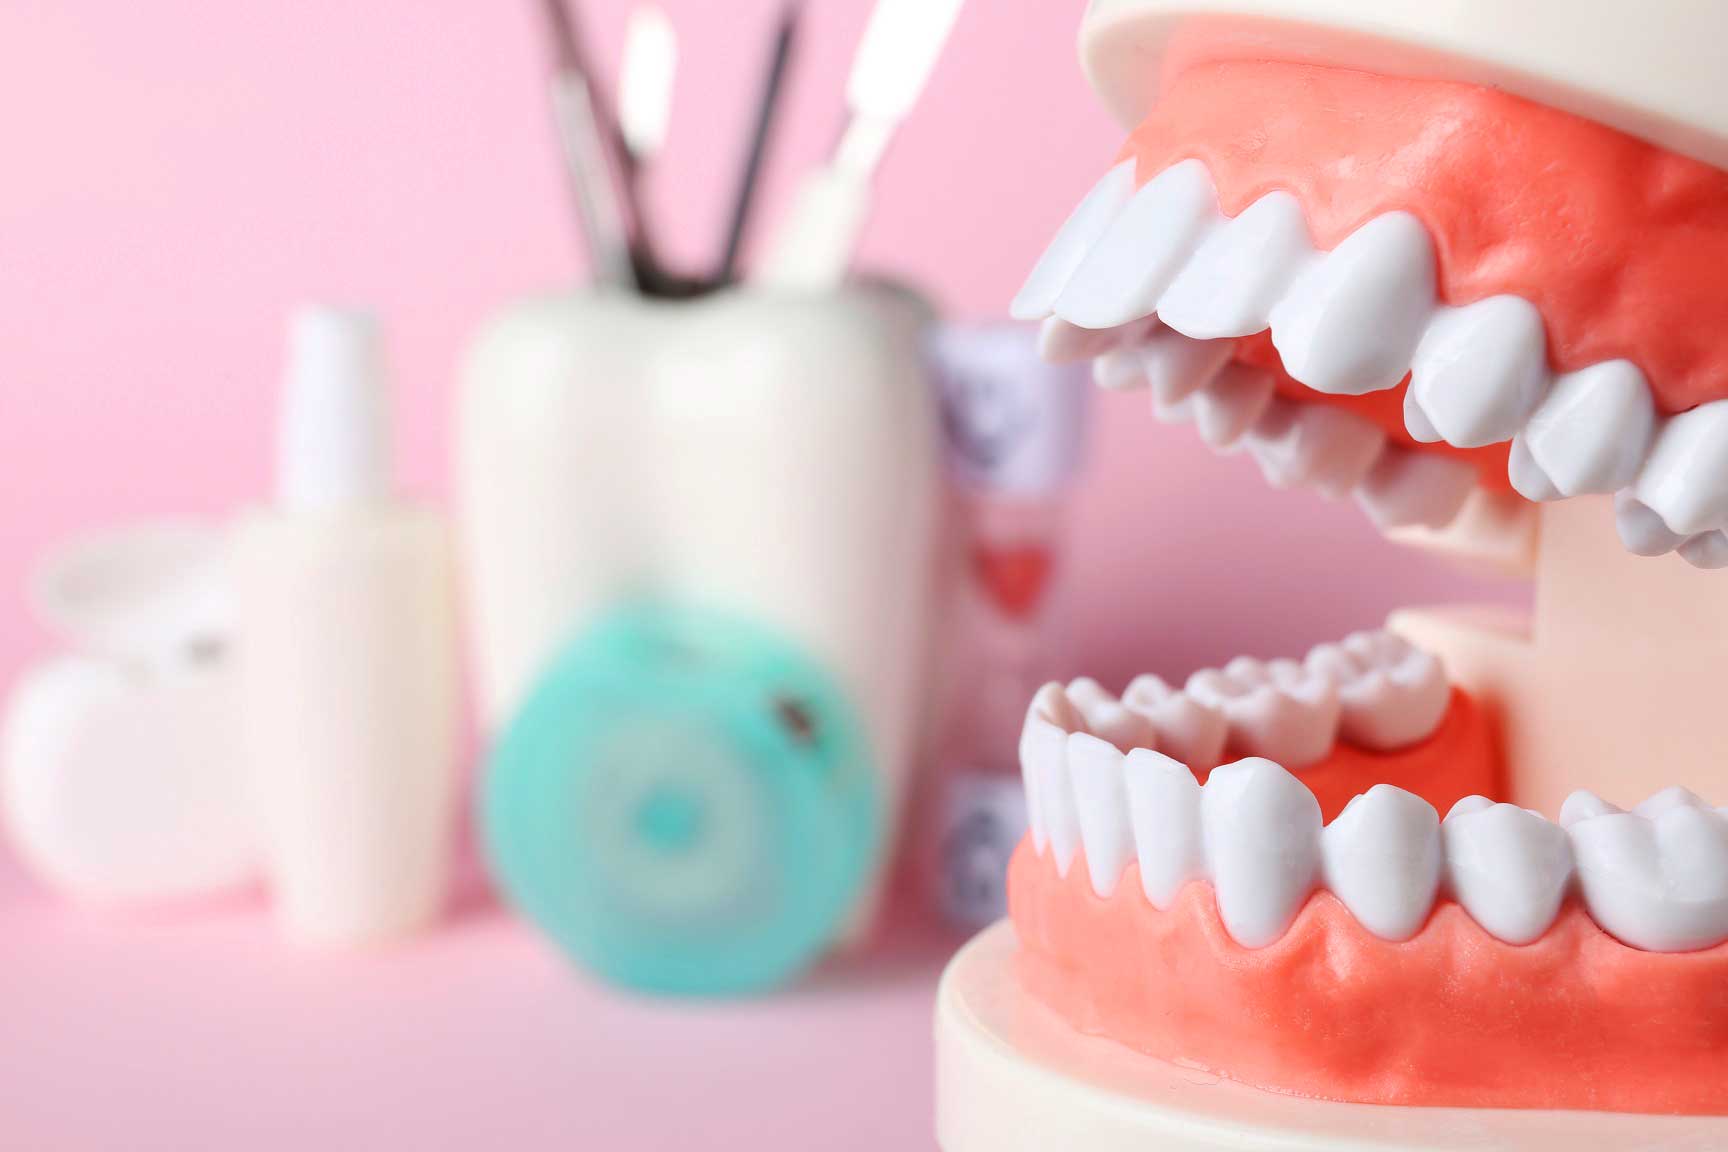 Learn How to Prevent Tooth Loss